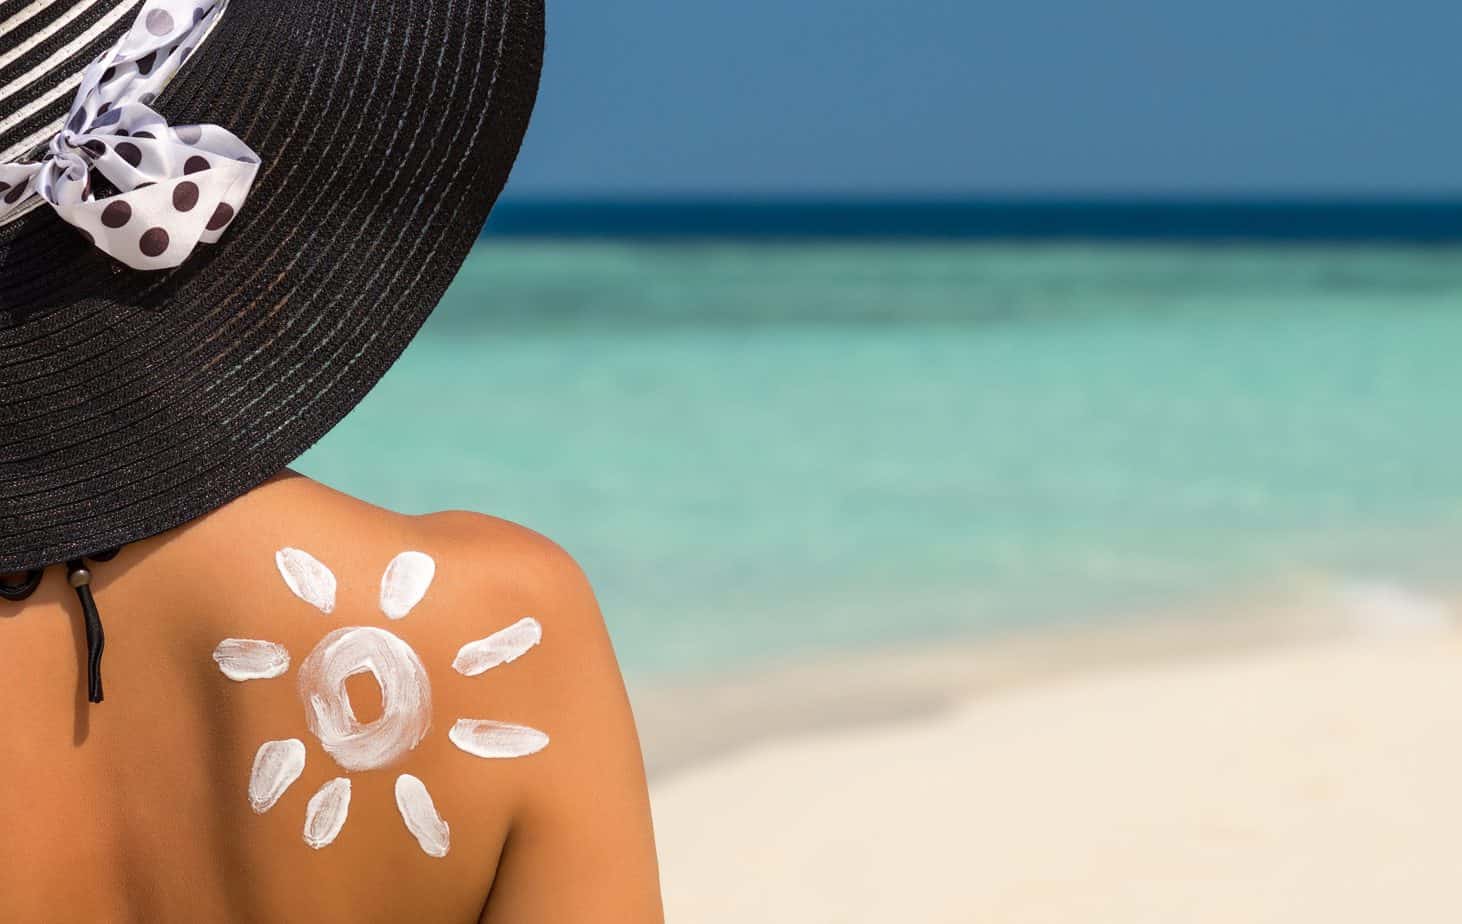 Cosmetics for sunbathing – what to look for when buying?